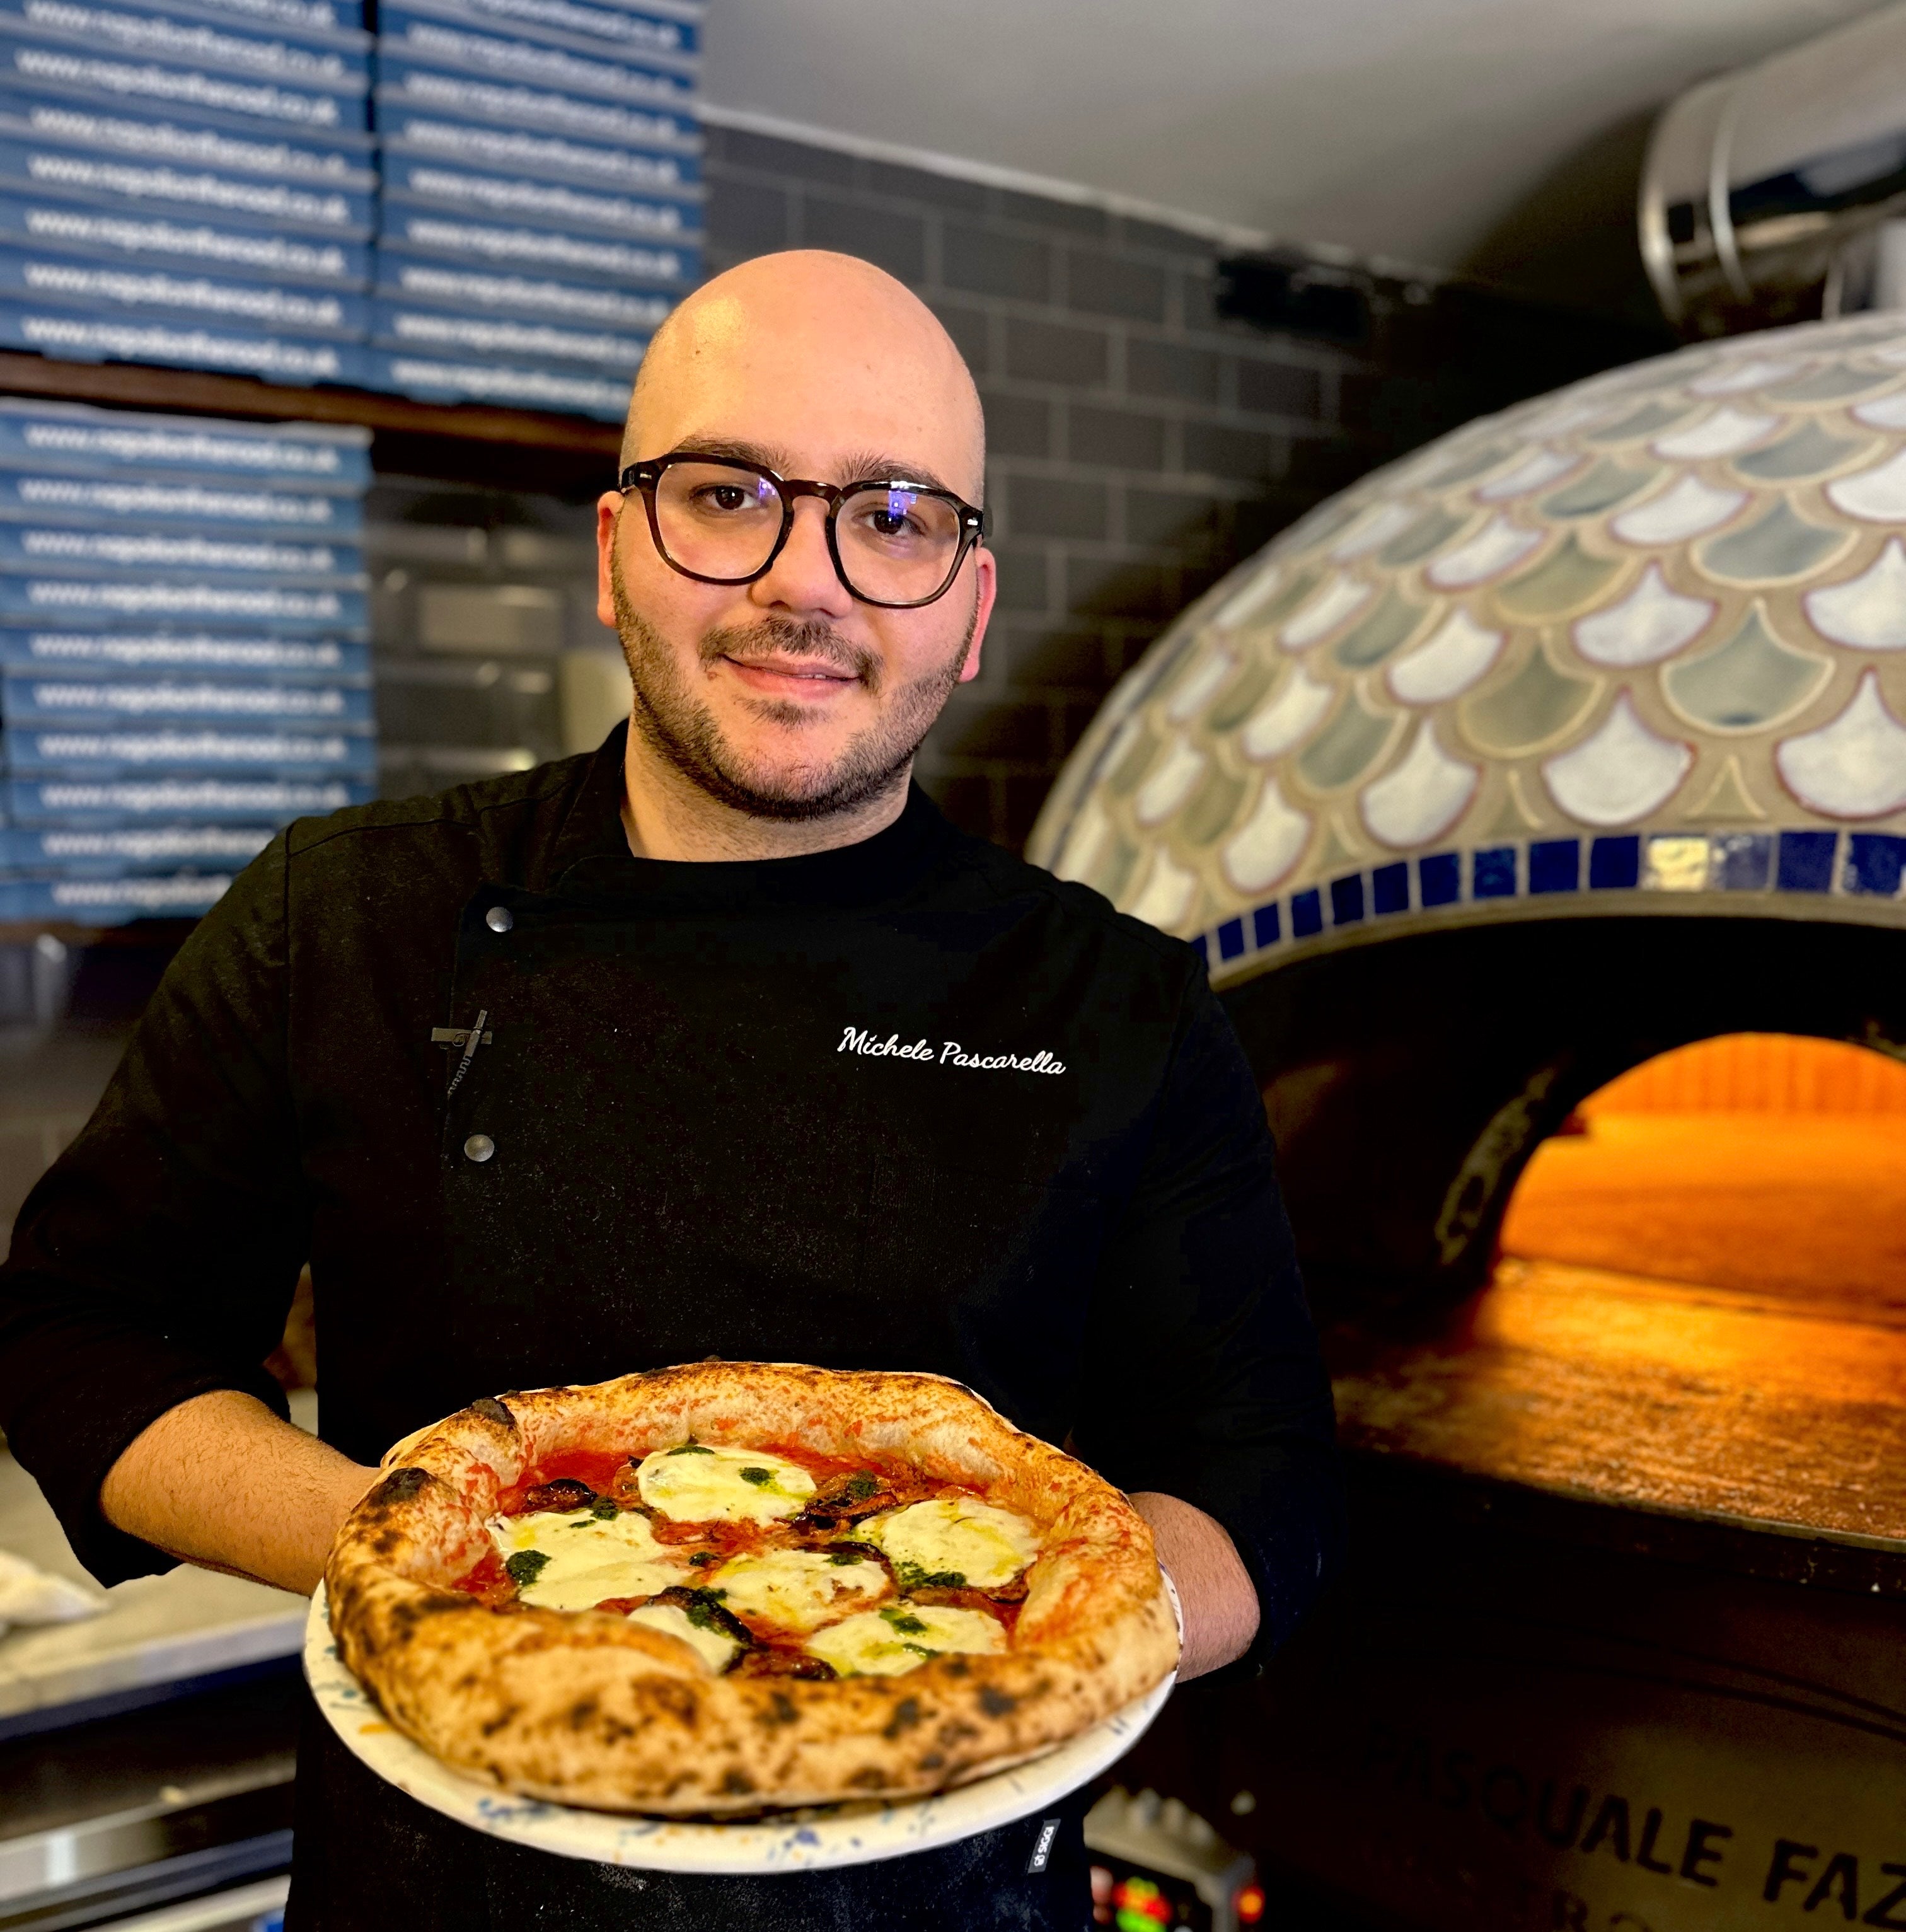 Michele Pascarella with one of his award-winning pizzas